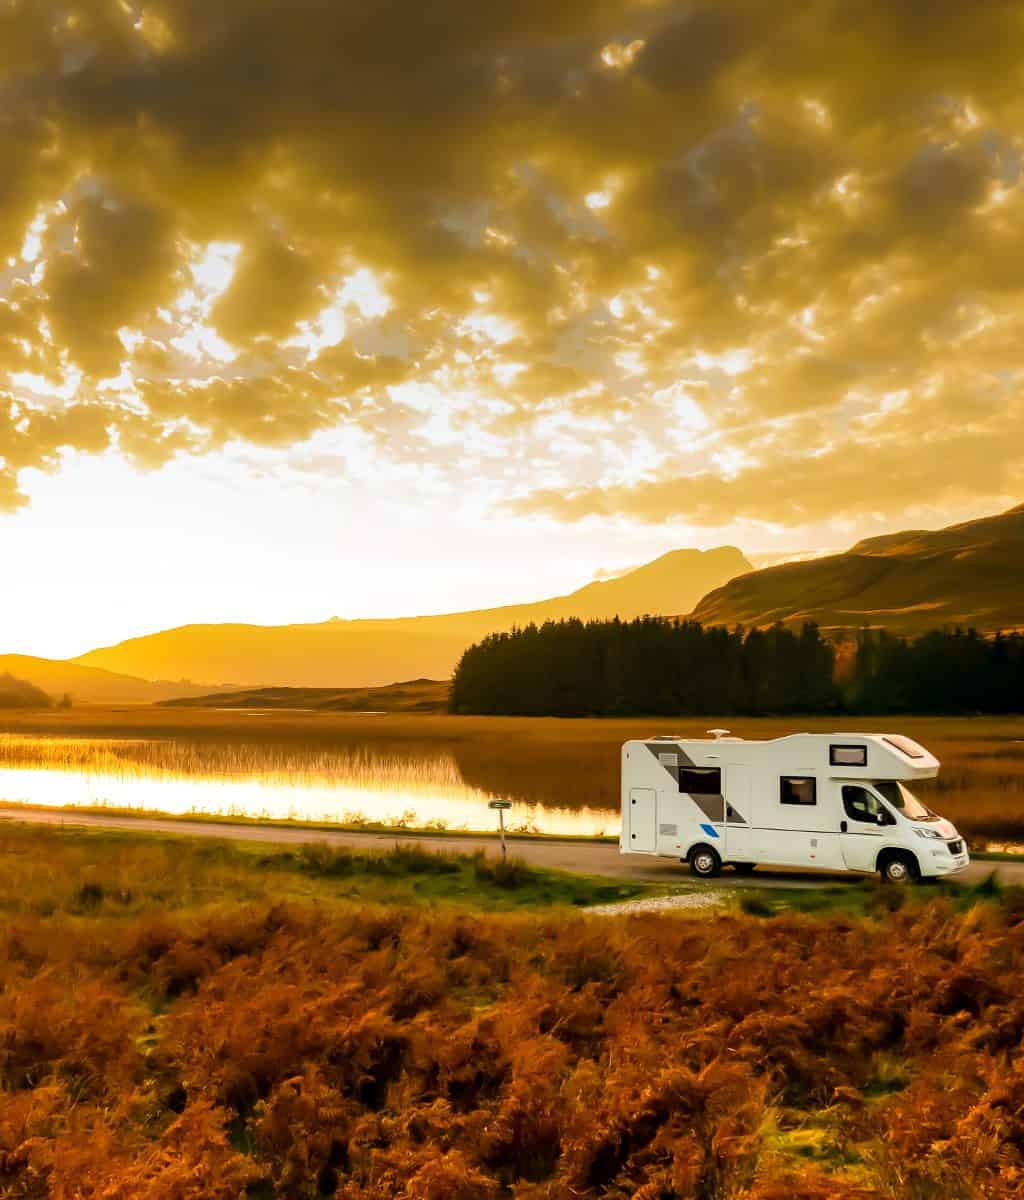 Lakeside camping on your motorhome road trip